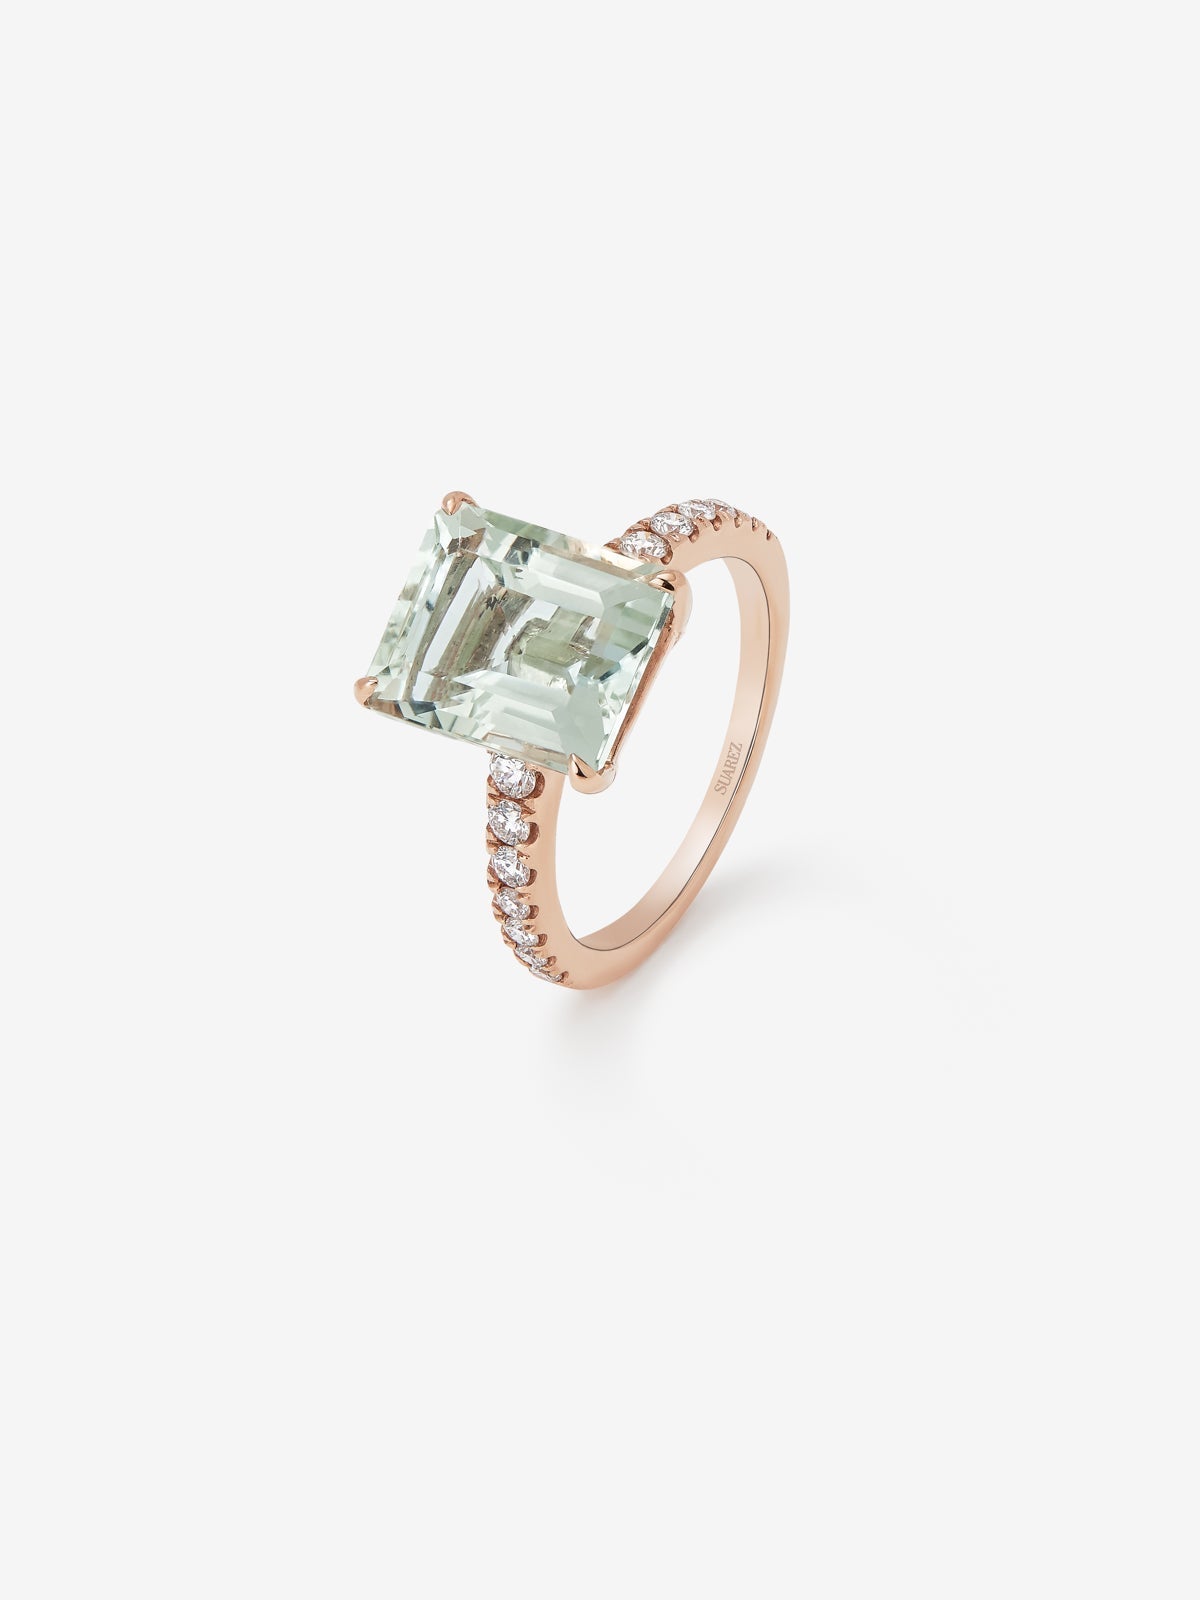 18K rose gold ring with green amethyst in emerald cut of 4.25 cts and 14 brilliant cut diamonds with a total of 0.32 cts